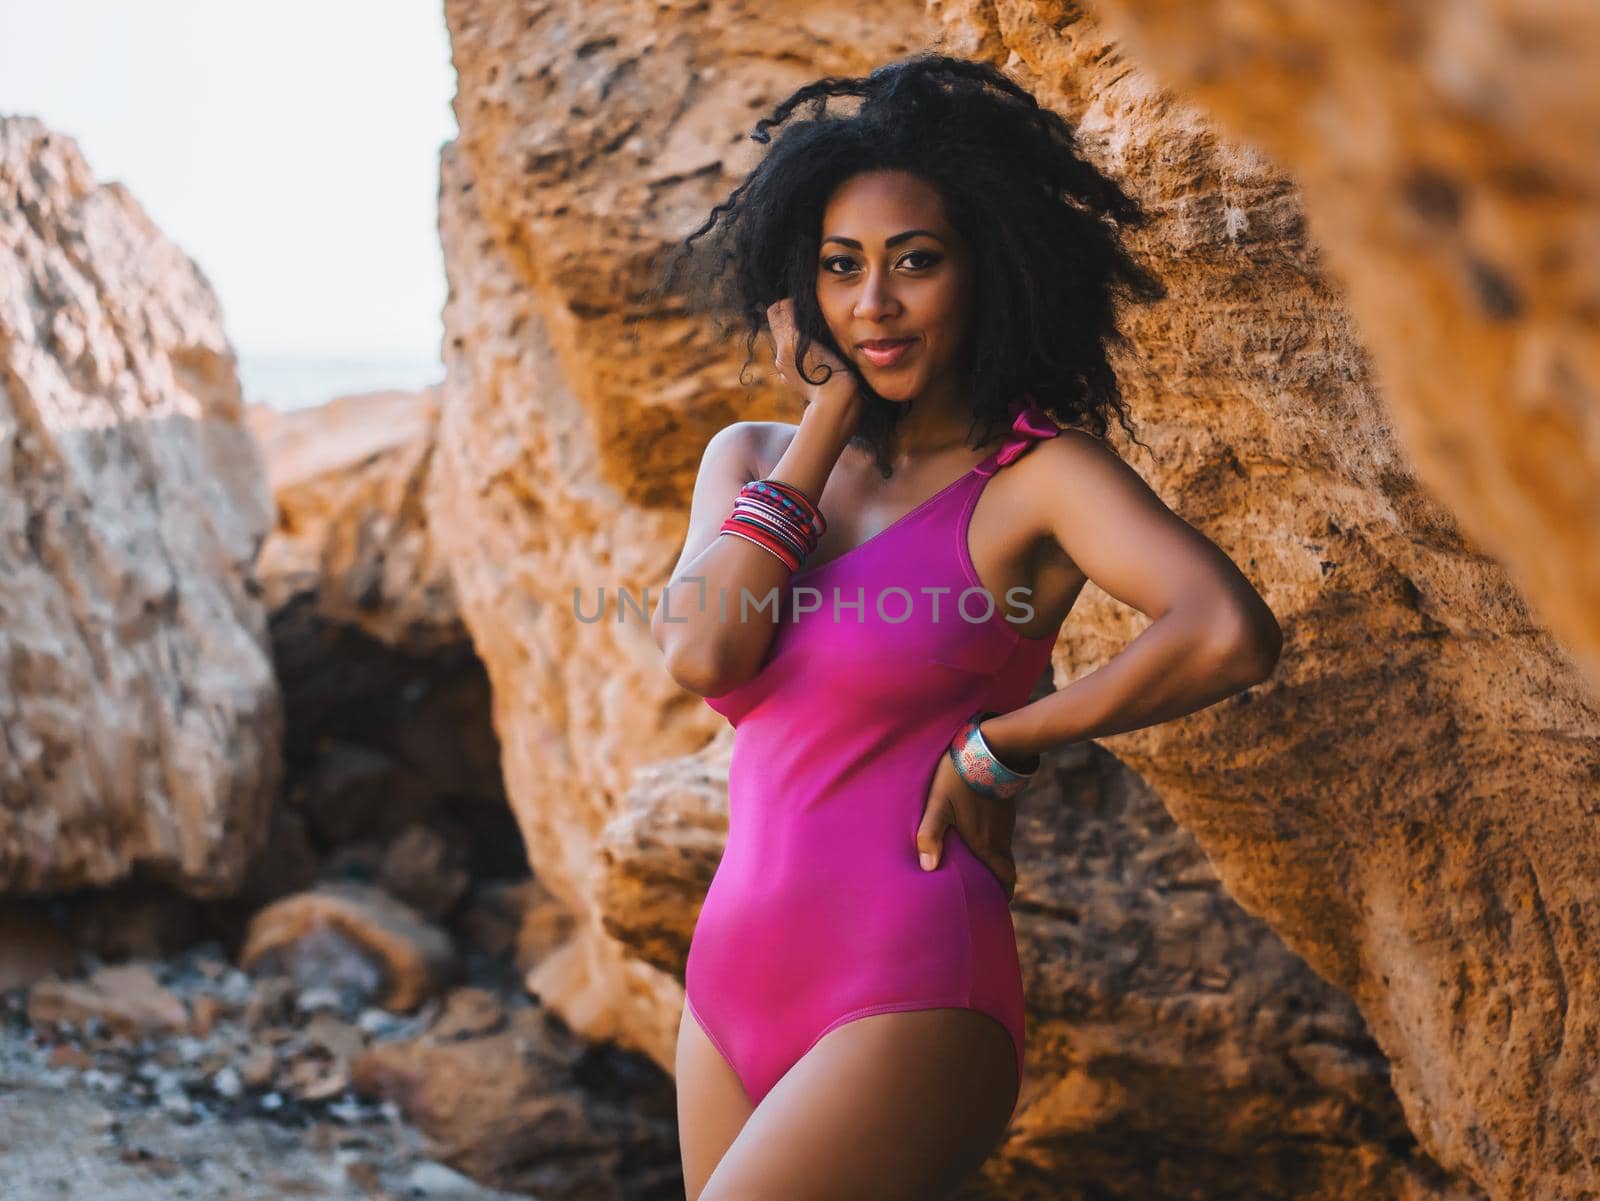 Portrait of black people, pretty happy young african american woman smiling. Rocks beach. Sexy girl in pink swimsuit and jewelry enjoying nature. Travel, holiday concept.